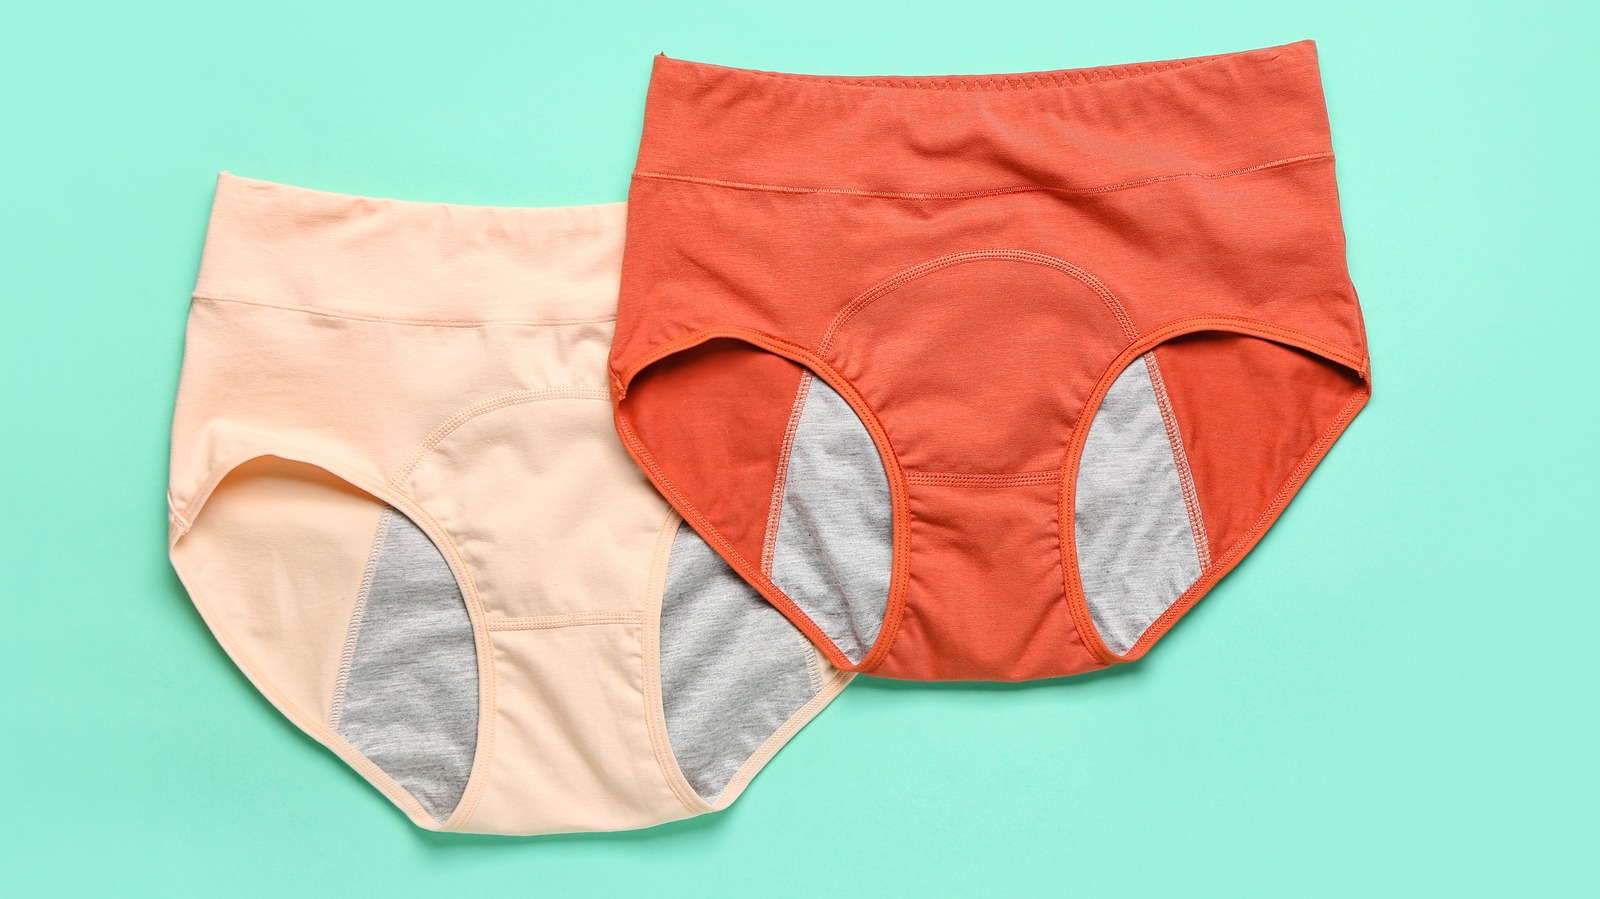 Washing your period underwear is really that simple. #PeriodAisle #Per